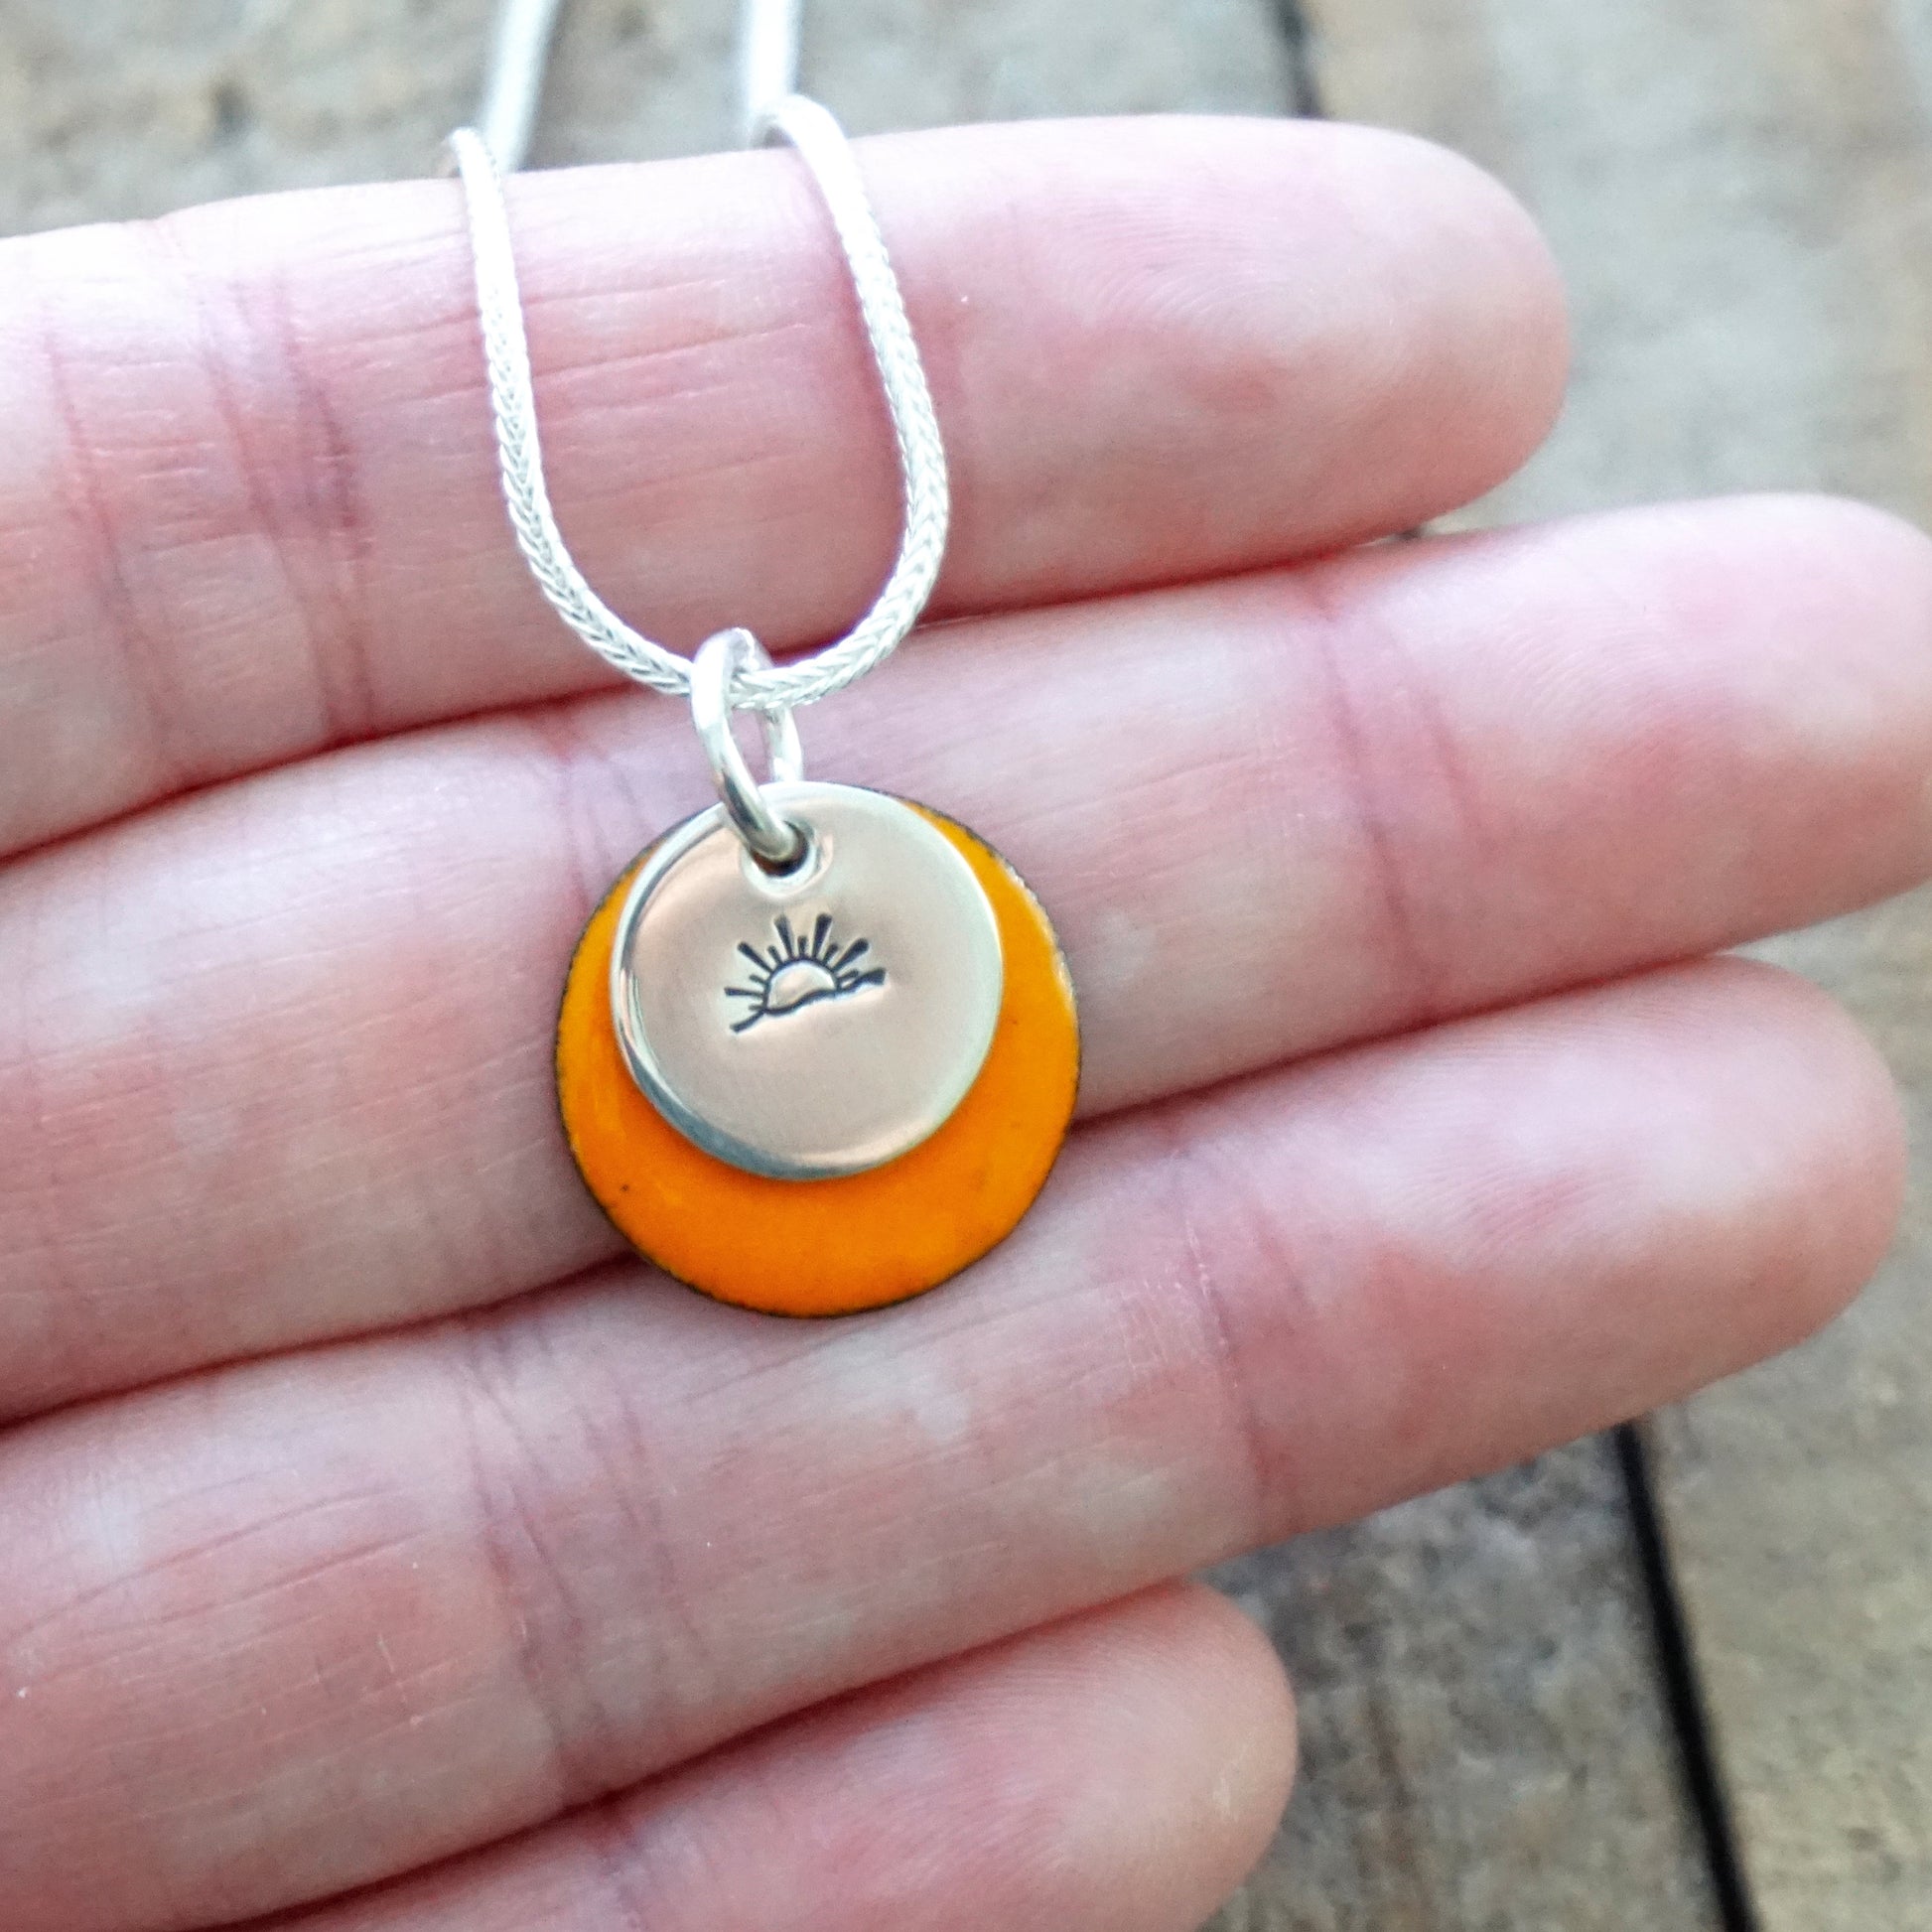 Hand Stamped Sterling Silver Sunset/Sunrise on Enamel Pendant - Create Your Own - Enamel Jewelry, Sunset Necklace, Sunrise Jewelry